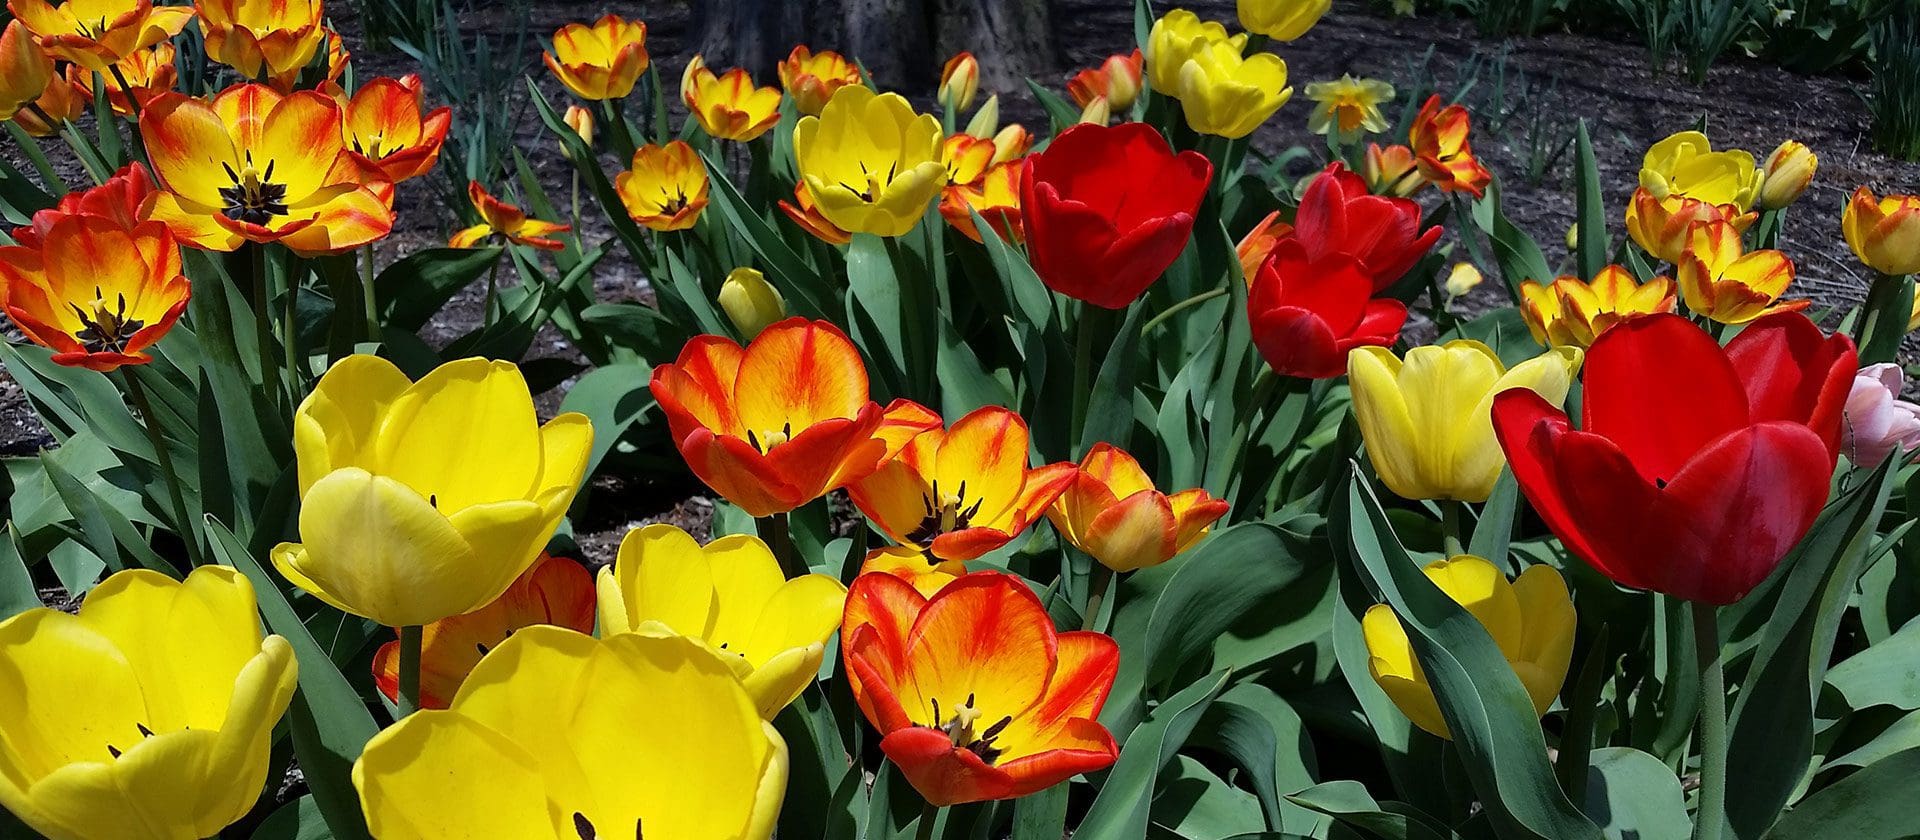 Vibrant garden of tulips displaying a mix of yellow and red blooms under bright sunlight.